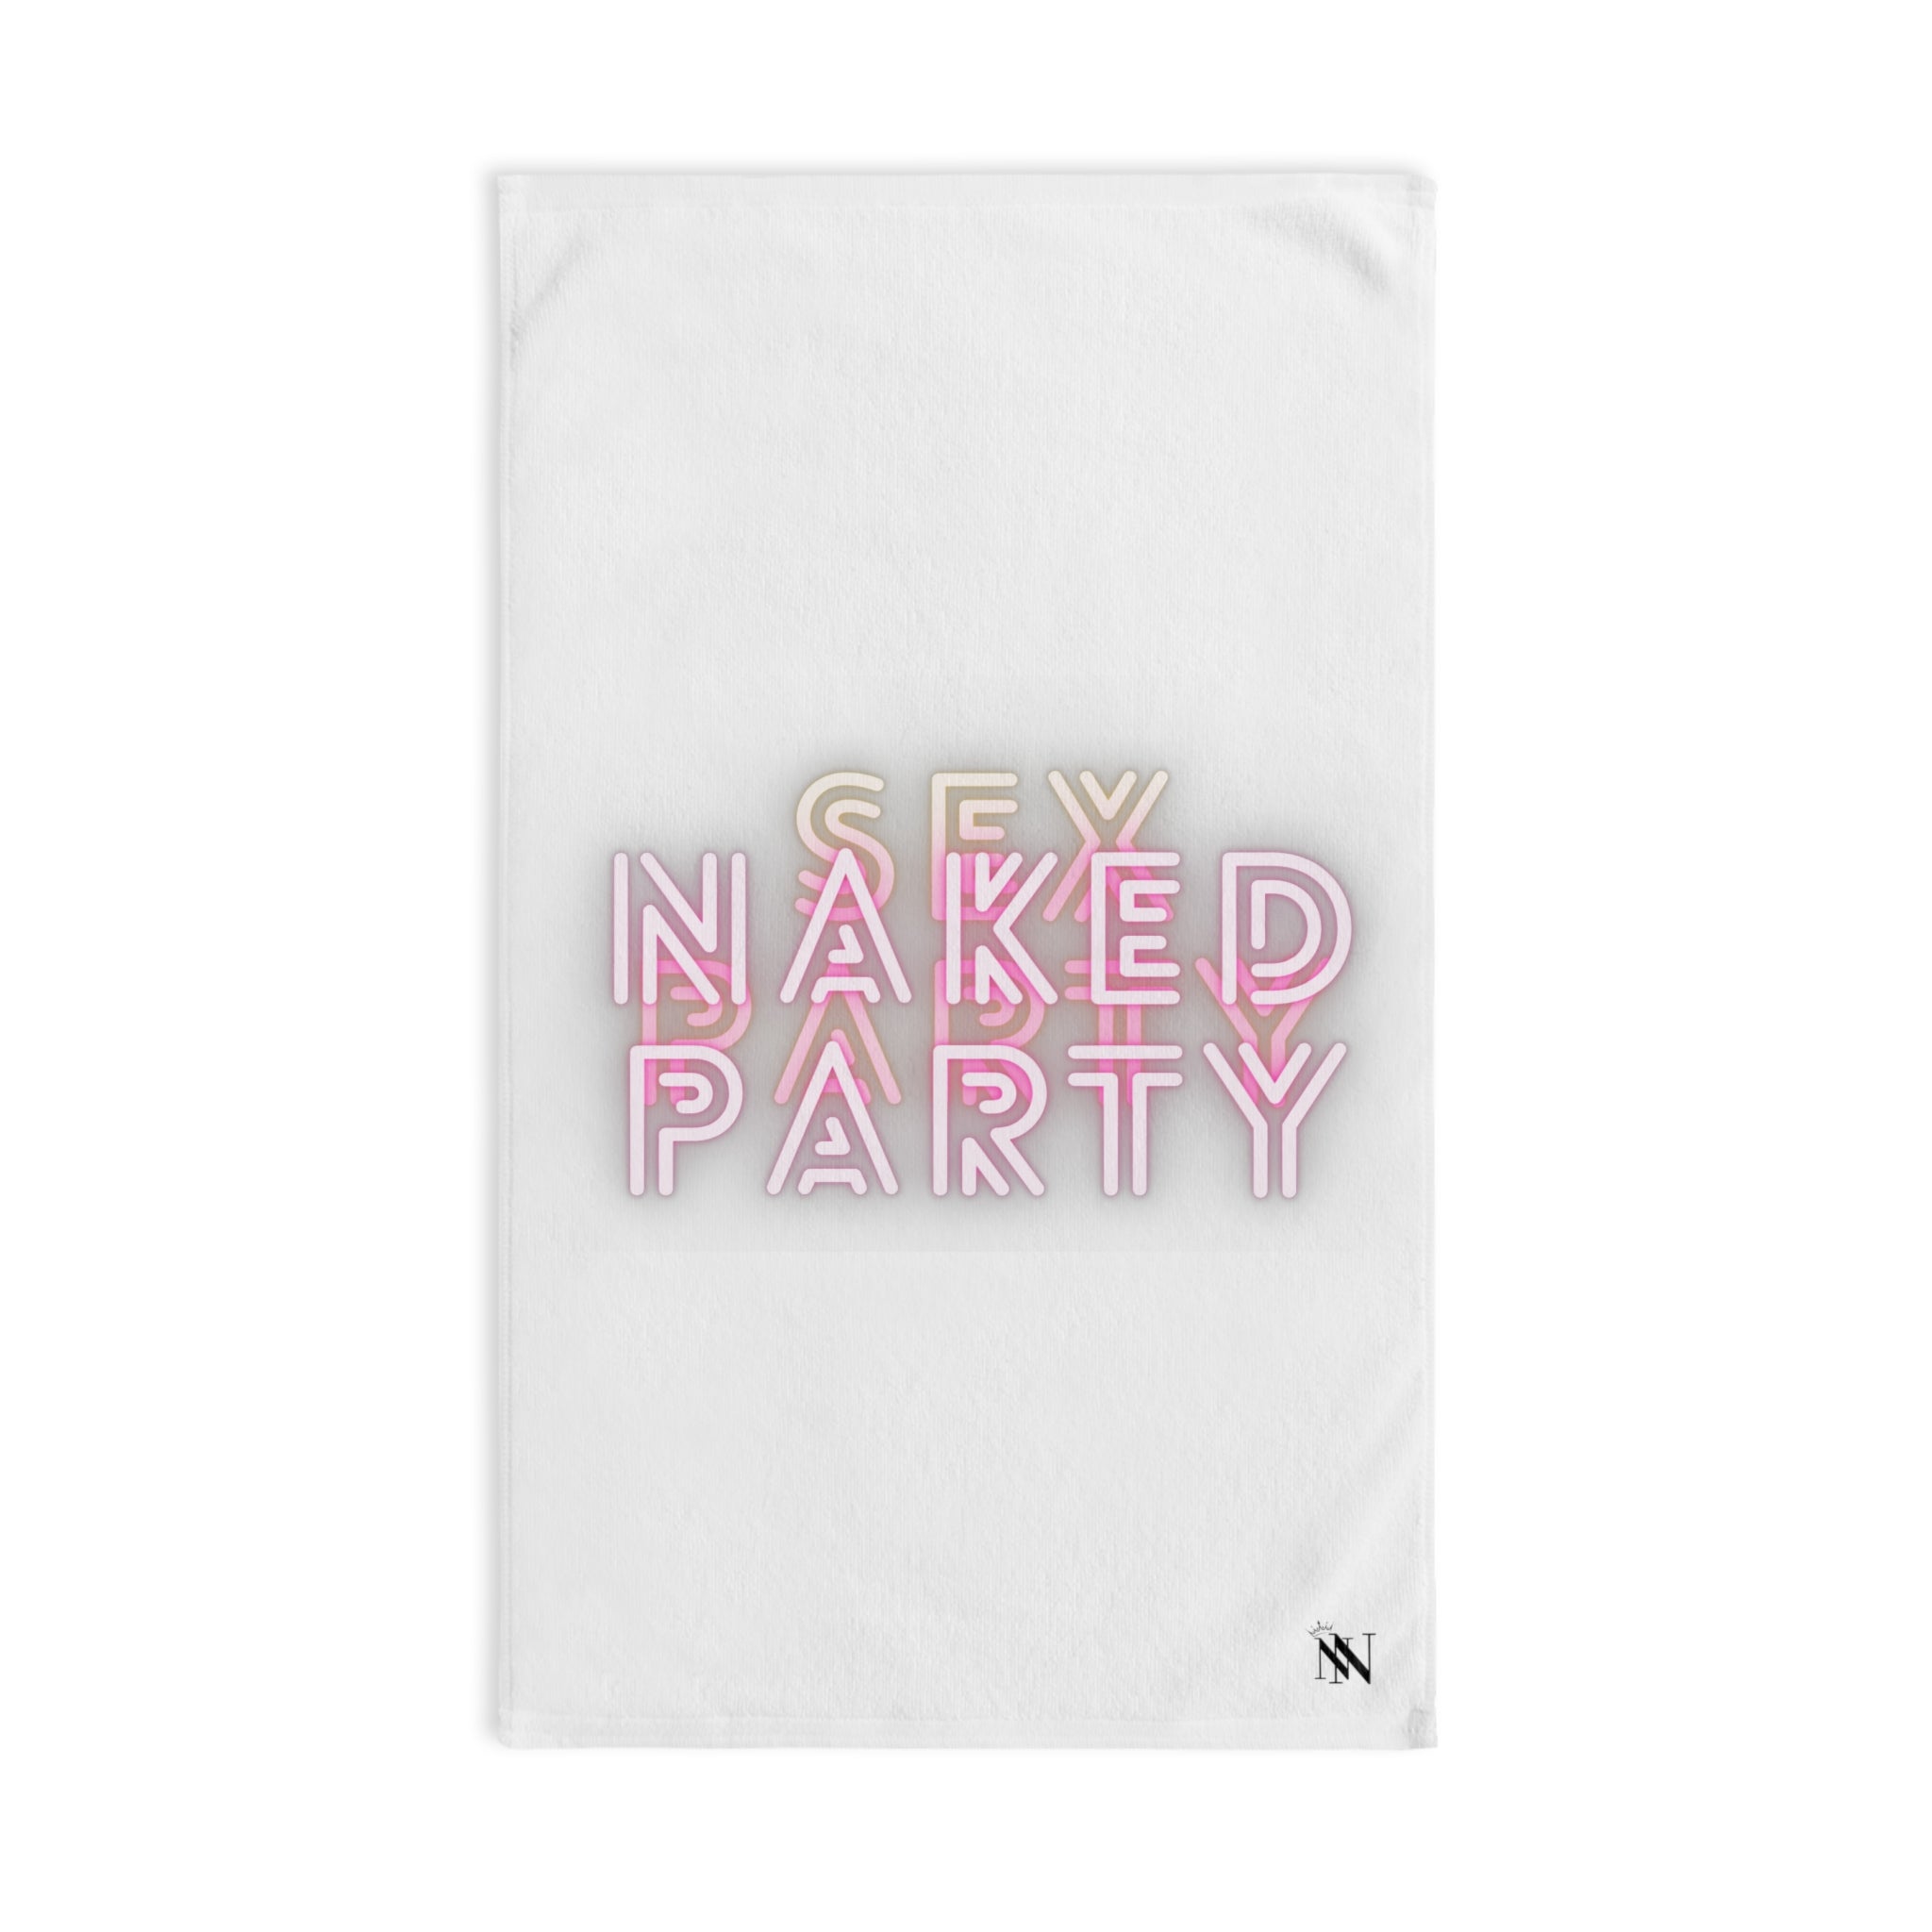 Naked  PartyWhite | Funny Gifts for Men - Gifts for Him - Birthday Gifts for Men, Him, Her, Husband, Boyfriend, Girlfriend, New Couple Gifts, Fathers & Valentines Day Gifts, Christmas Gifts NECTAR NAPKINS